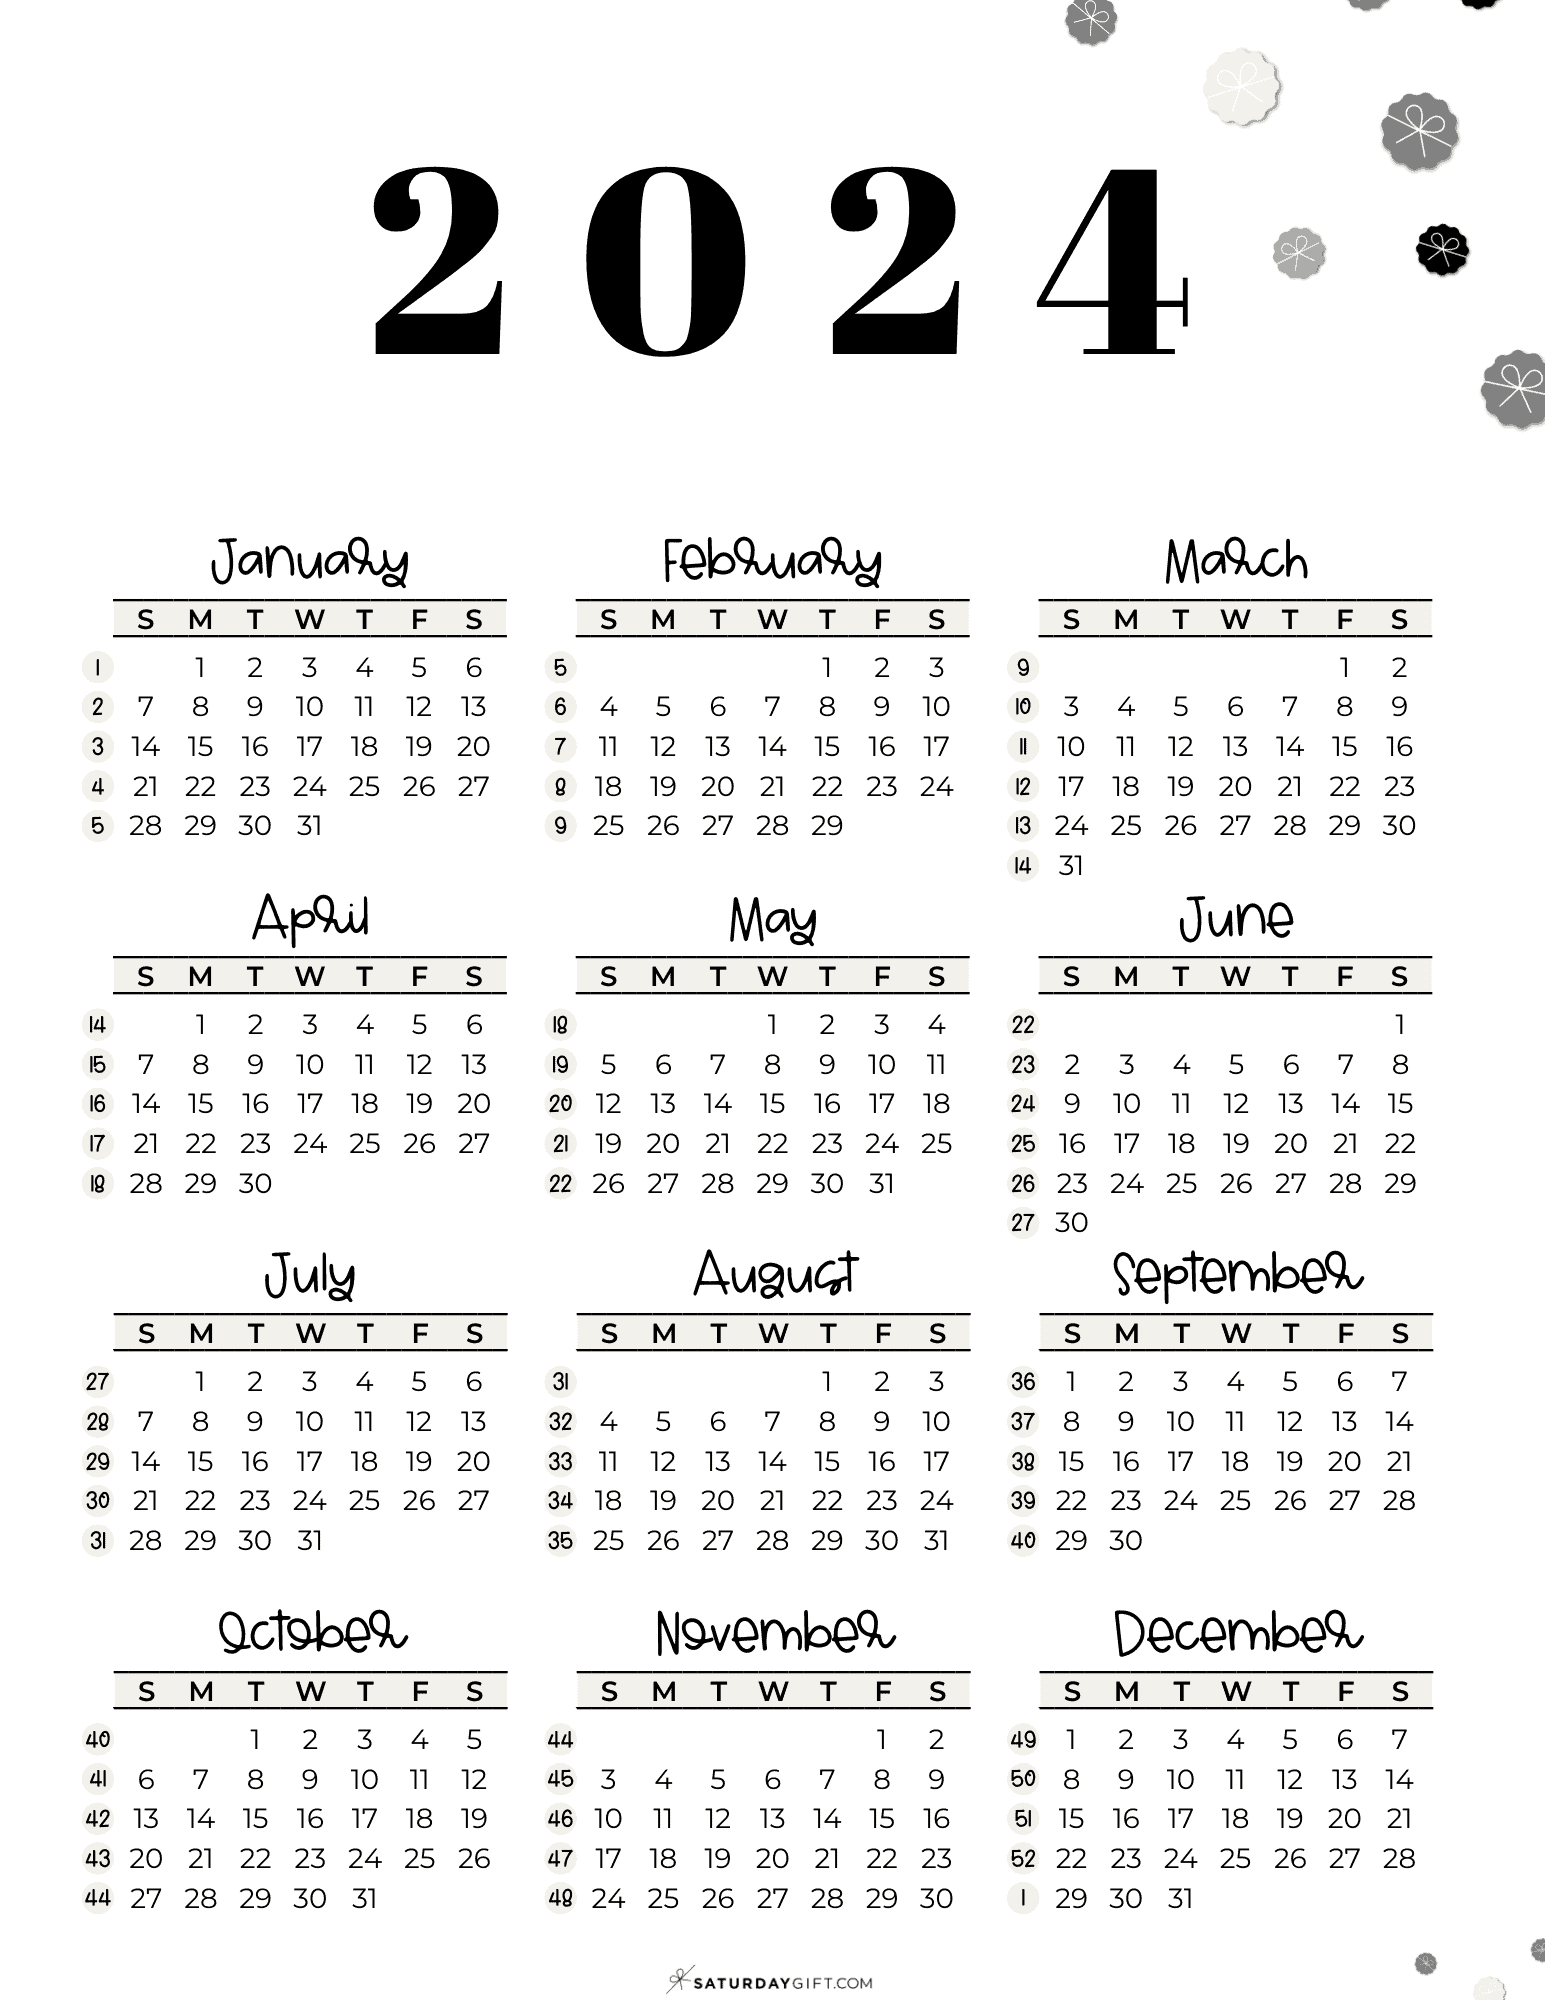 Leap Year List - When Is The Next Leap Year? | Is 2024 The Next Leap Year